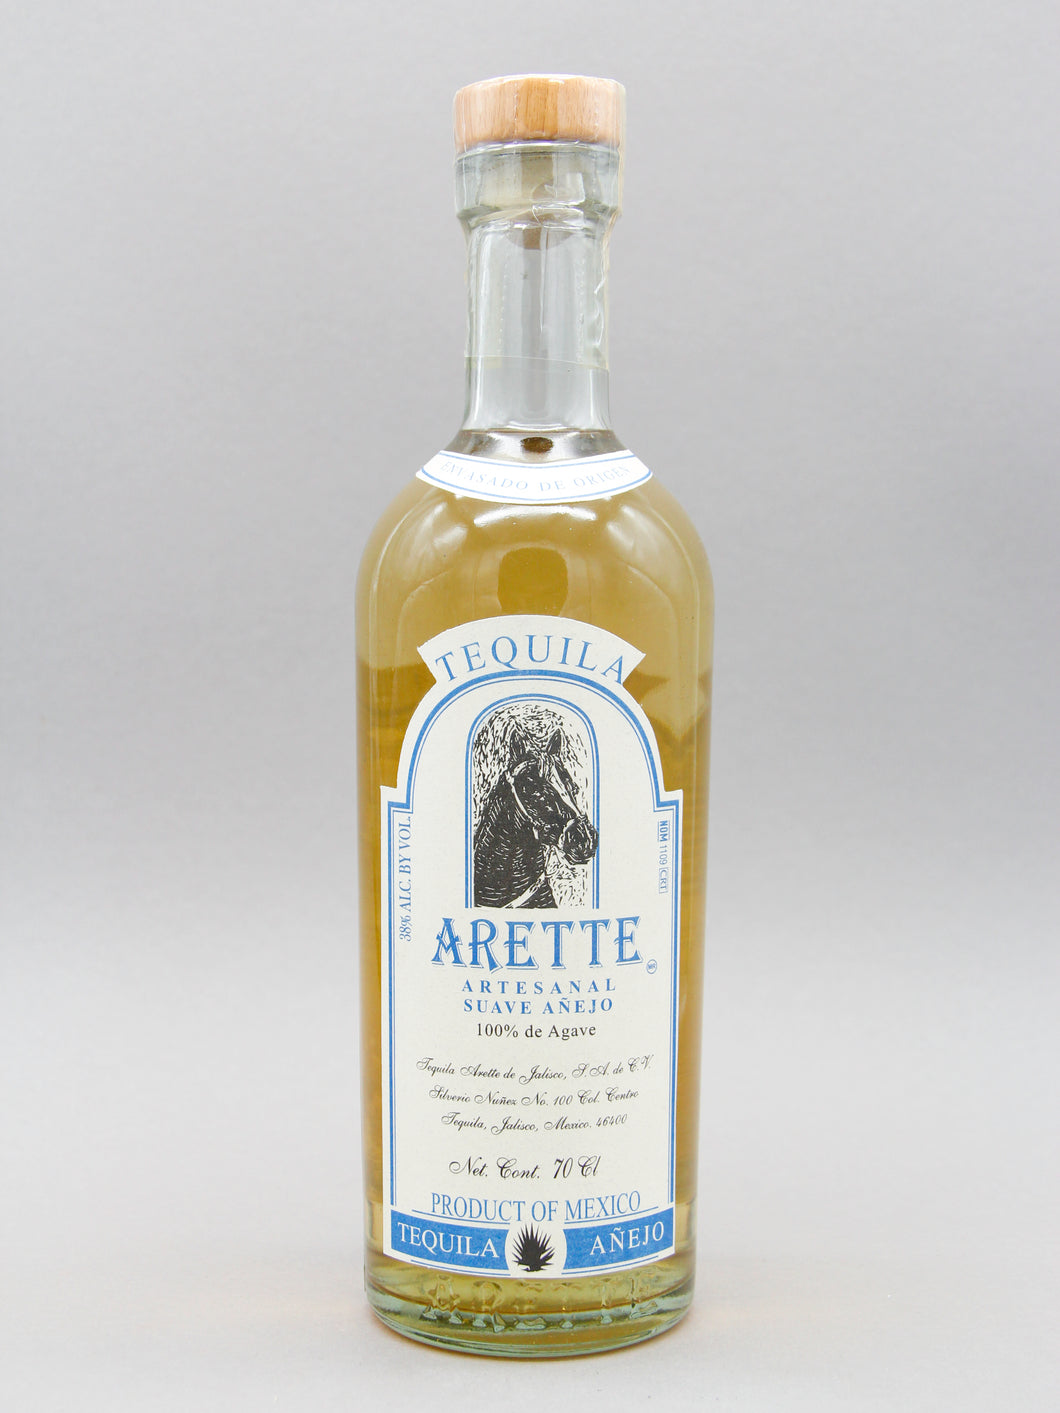 Arette Suave Anejo Tequila 100% Agave (38%, 70cl)